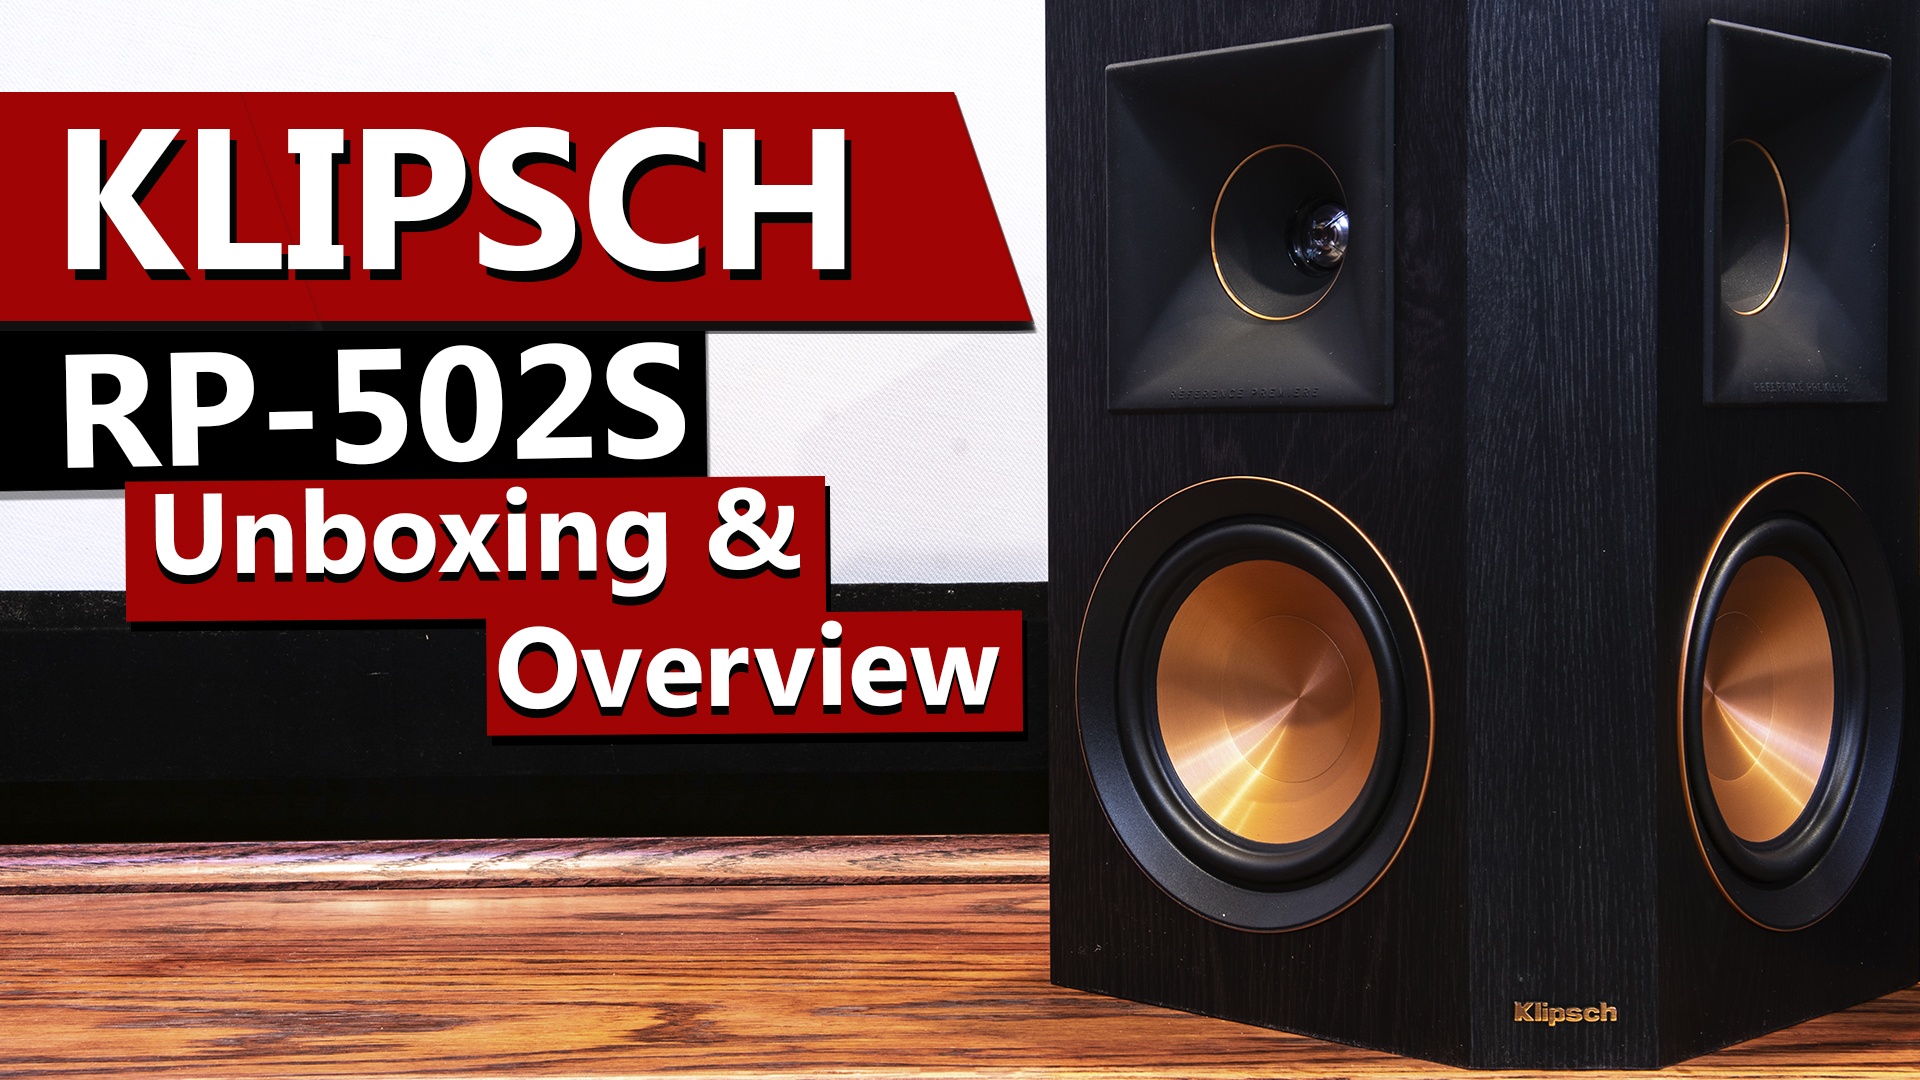 Klipsch RP-502S Reference Premiere Surround Speaker Unboxing and Overview